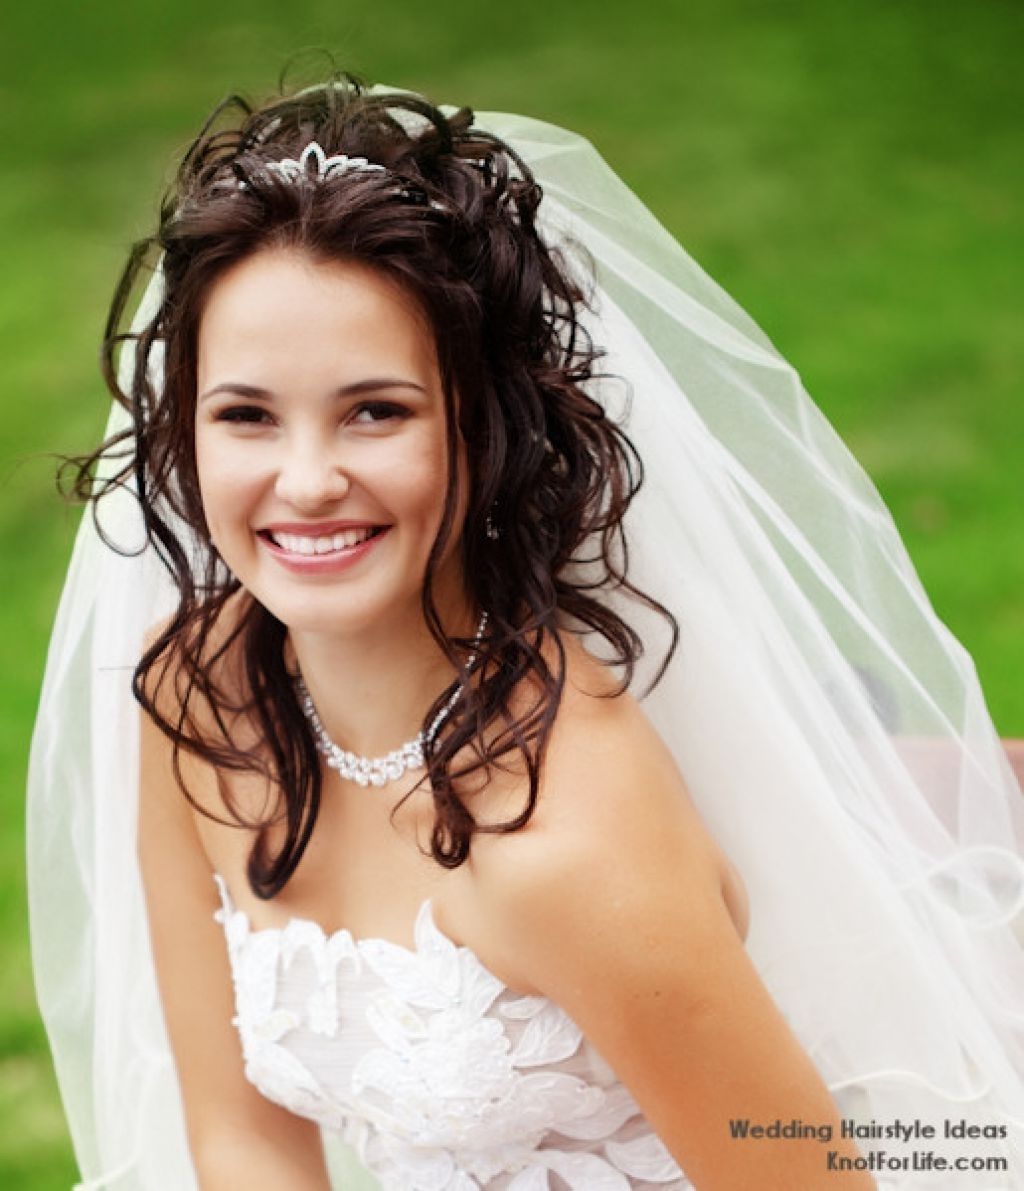 Preferred Wedding Hairstyles For Long Straight Hair With Veil Throughout Beautiful Styles Of Wedding Hairstyles With Veils And Tiaras (View 1 of 15)